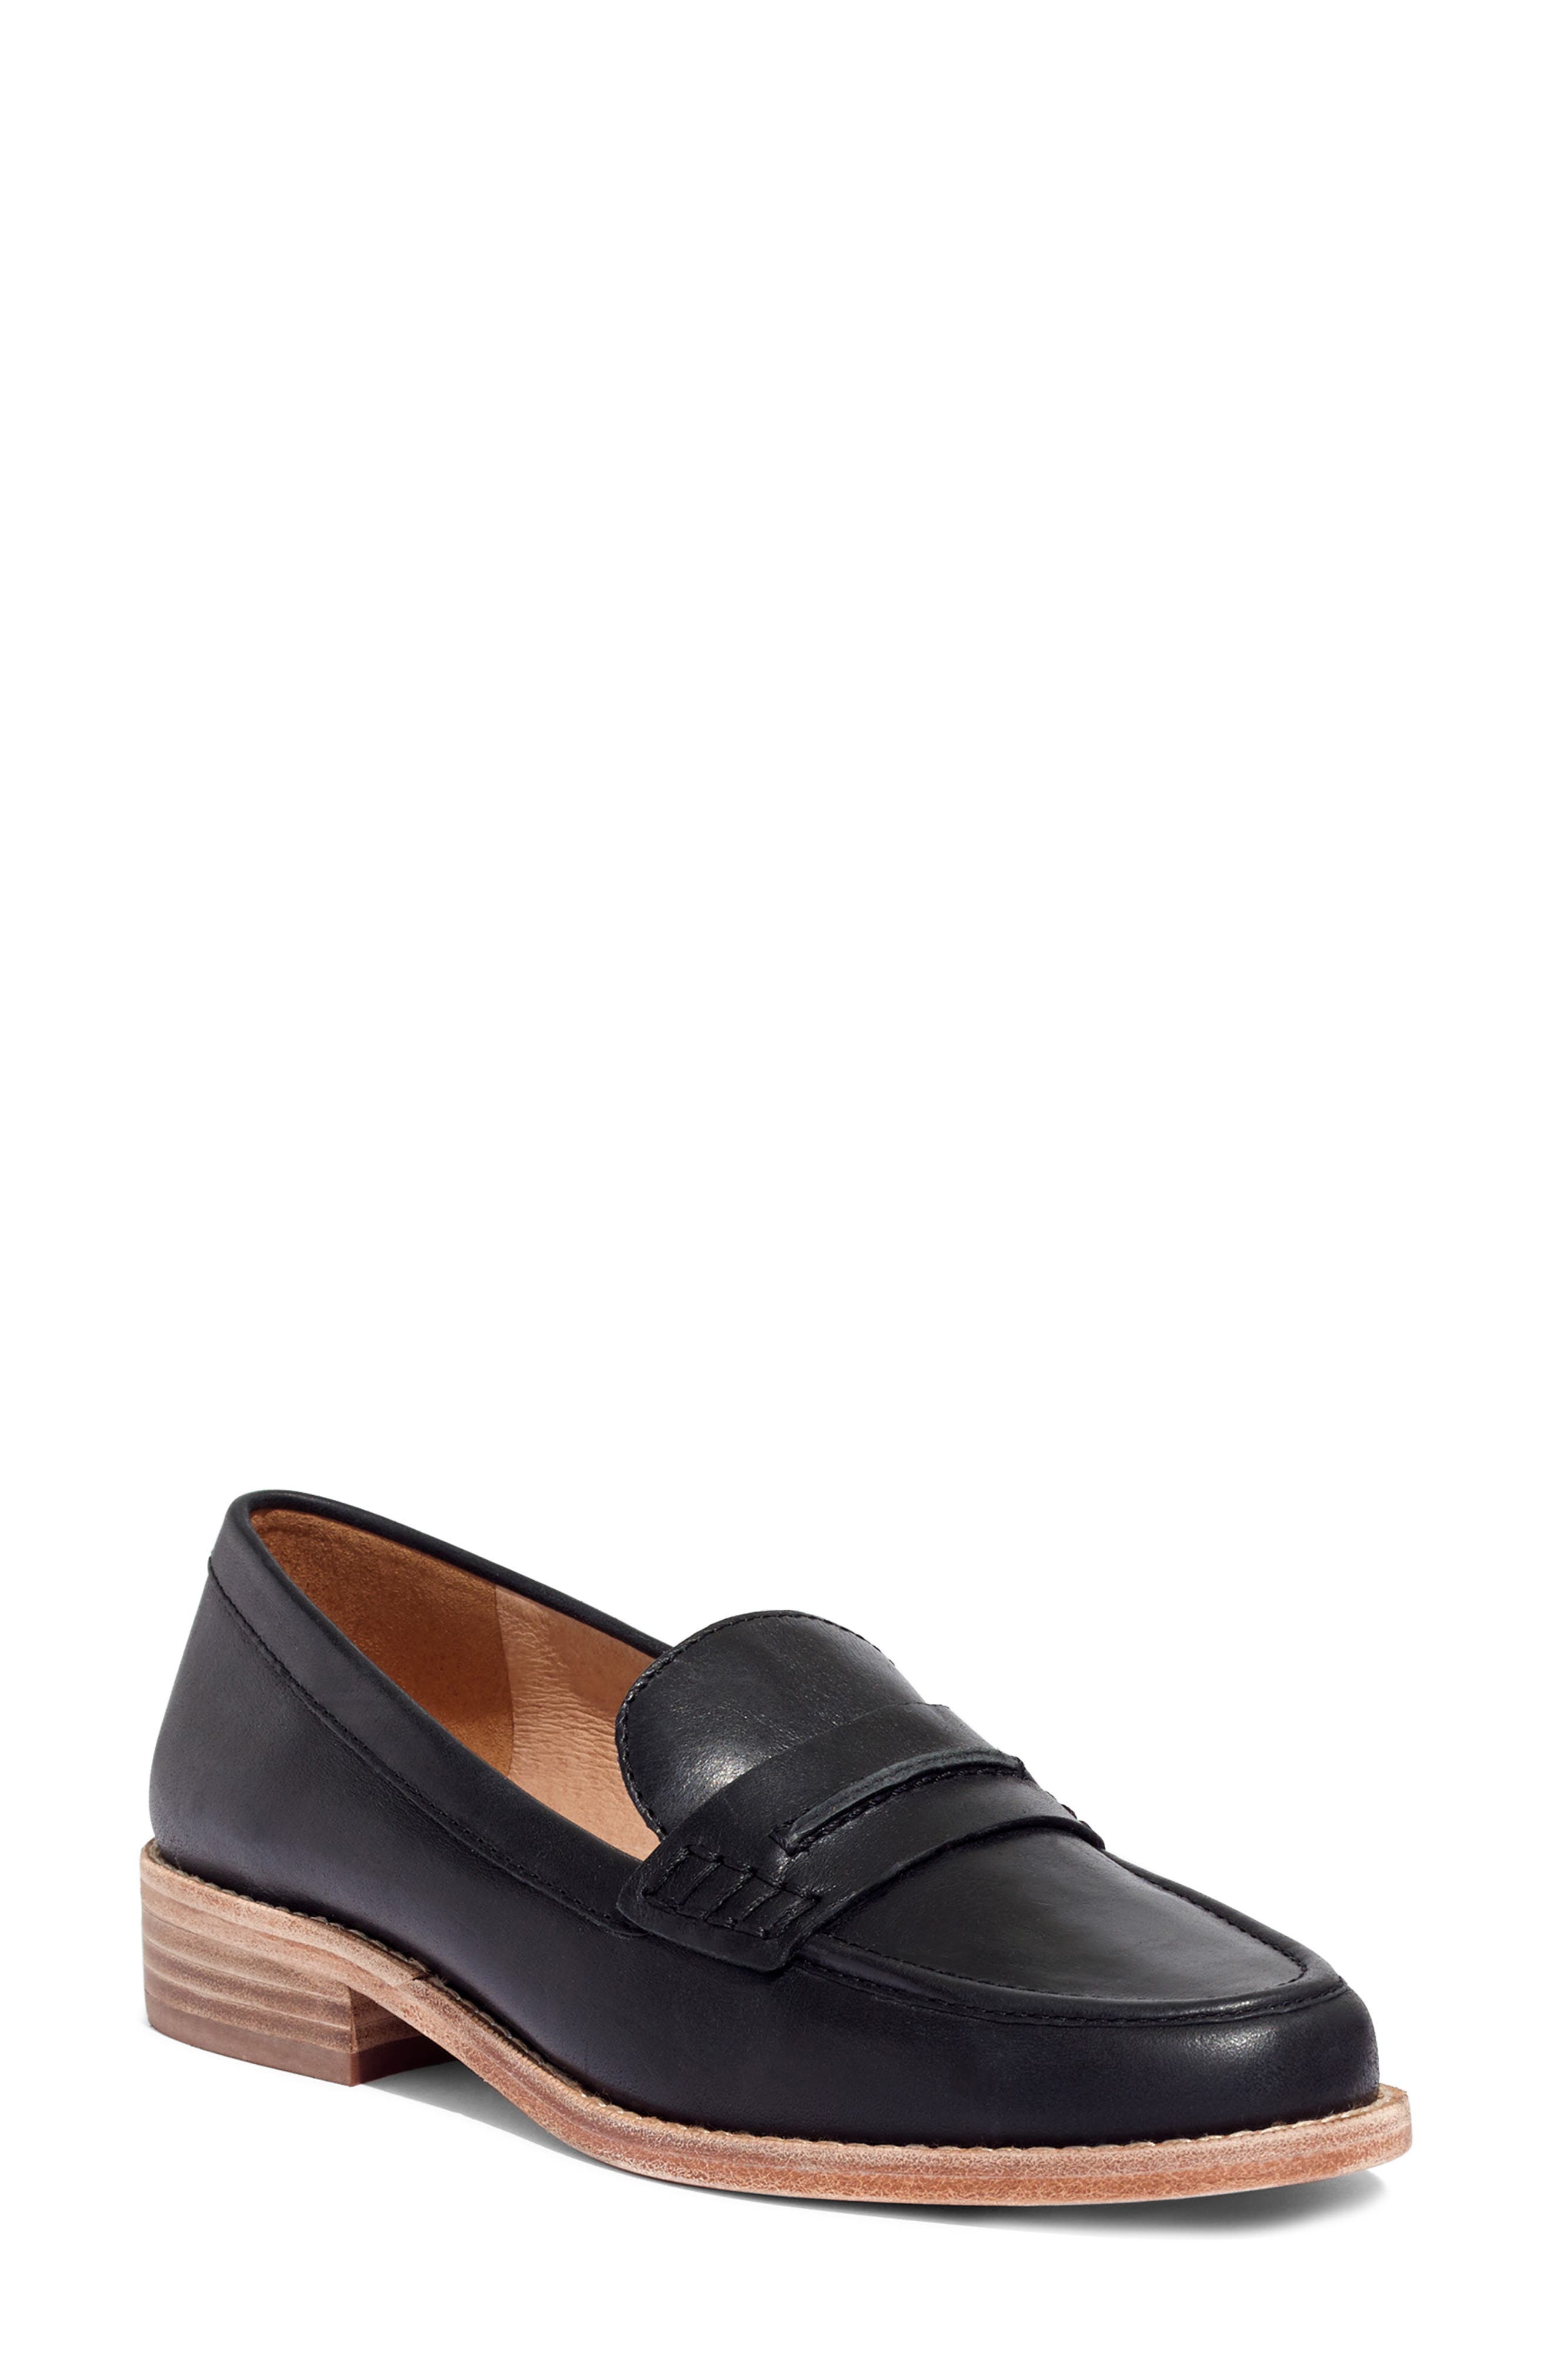 leather black loafers women's